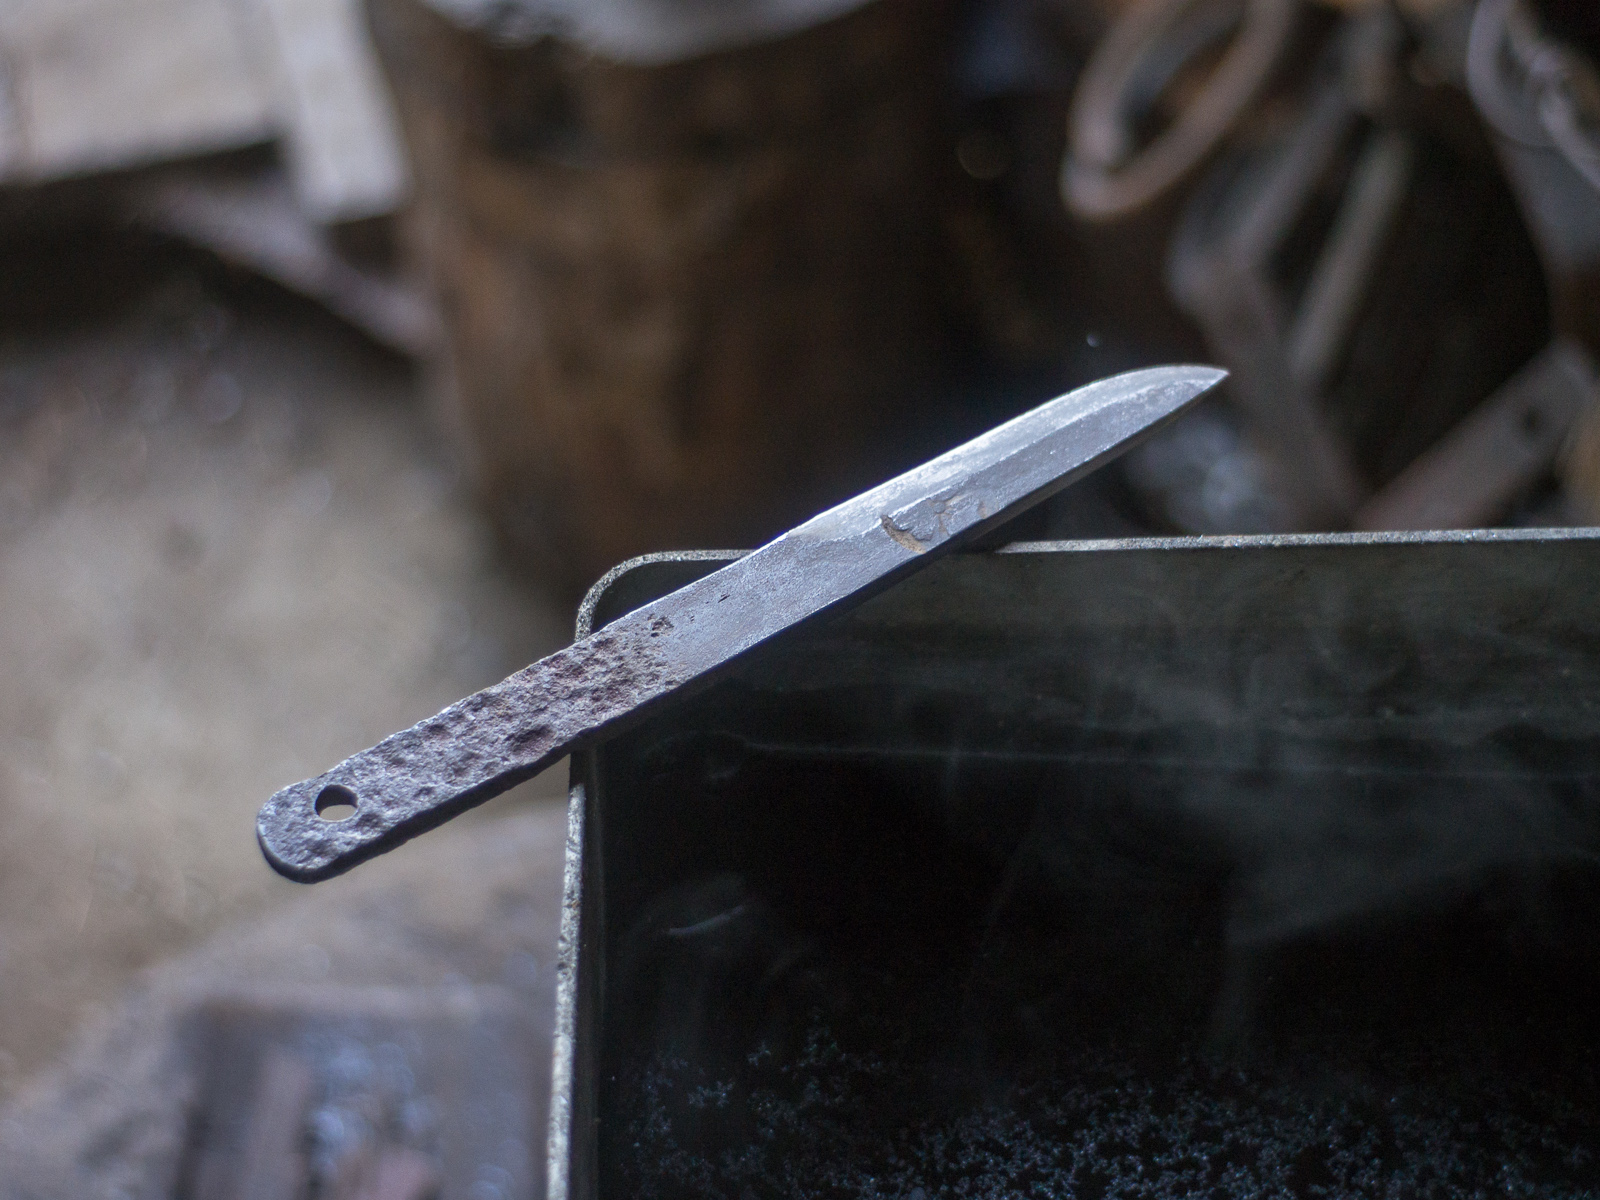 Island Blacksmith: Charcoal forged knives made from reclaimed and natural materials using traditional techniques